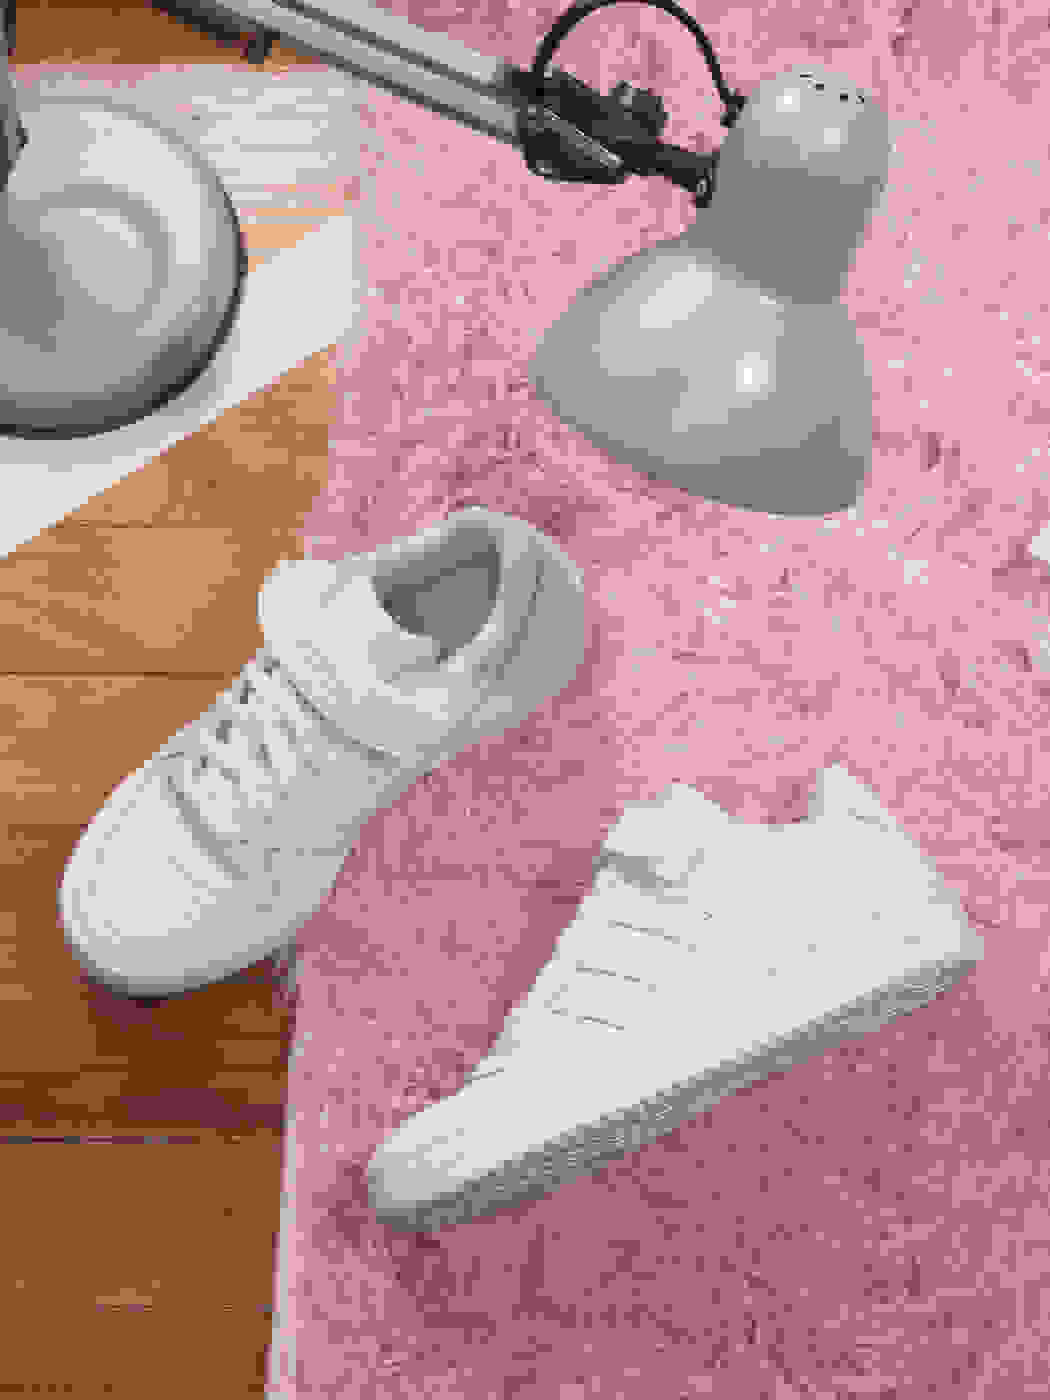 A pair of white sneakers on pink carpet